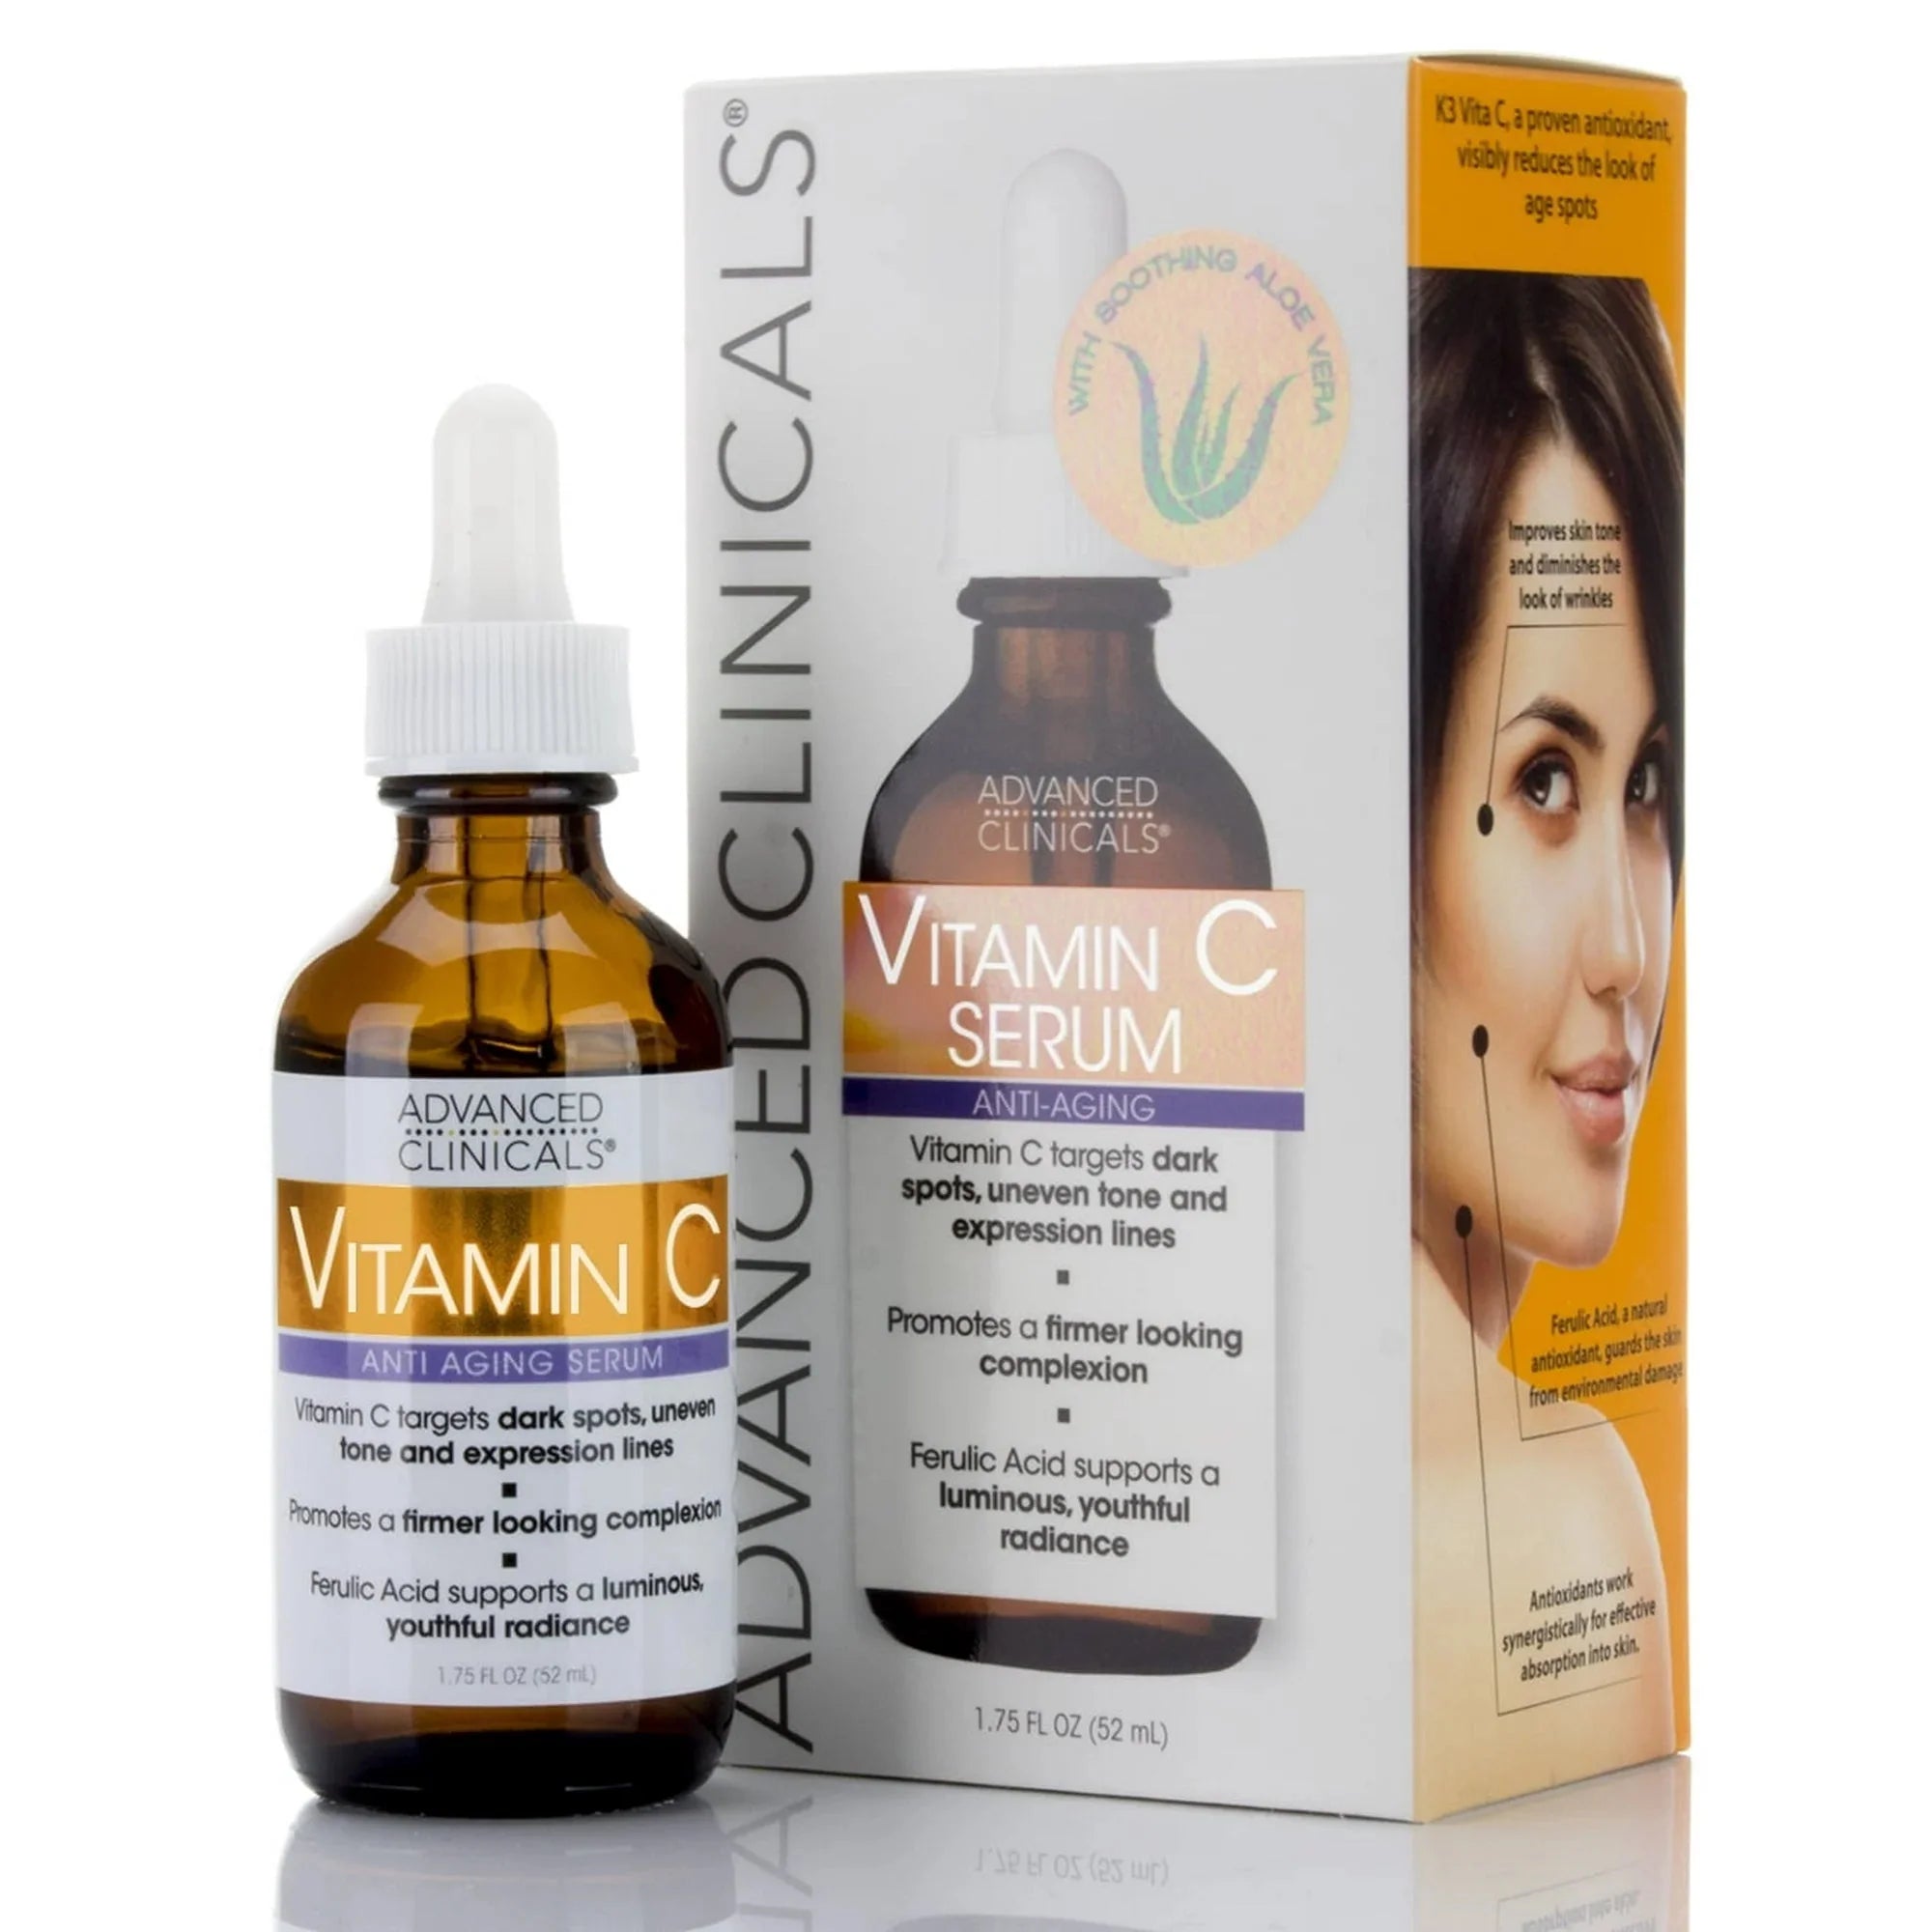 Wholesale prices with free shipping all over United States Advanced Clinicals Vitamin C Face Serum for Dark Spots, Uneven Skin Tone, Crows Feet and Expression Lines. 1.75 fl oz. - Steven Deals